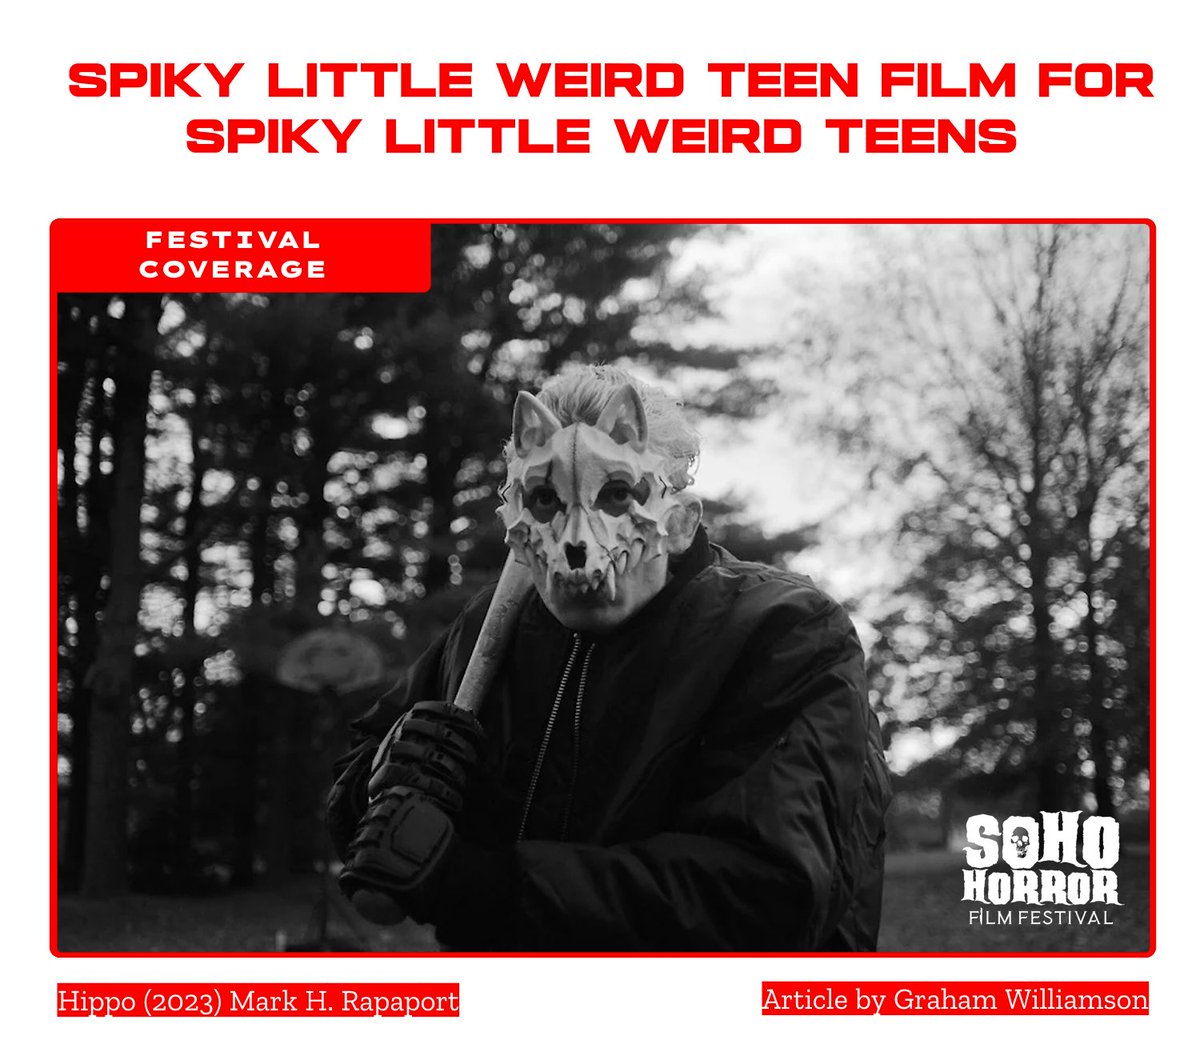 'Spikey Little Weird Teen Movies for Spikey Little Weird Teens', we didn't know we missed these things until @GrahamWFilm talked about them so enthusiastically with Hippo from @SohoHorrorFest. Read More on @MarkRapaport's film on our Website, here: thegeekshow.co.uk/hippo-soho-hor…